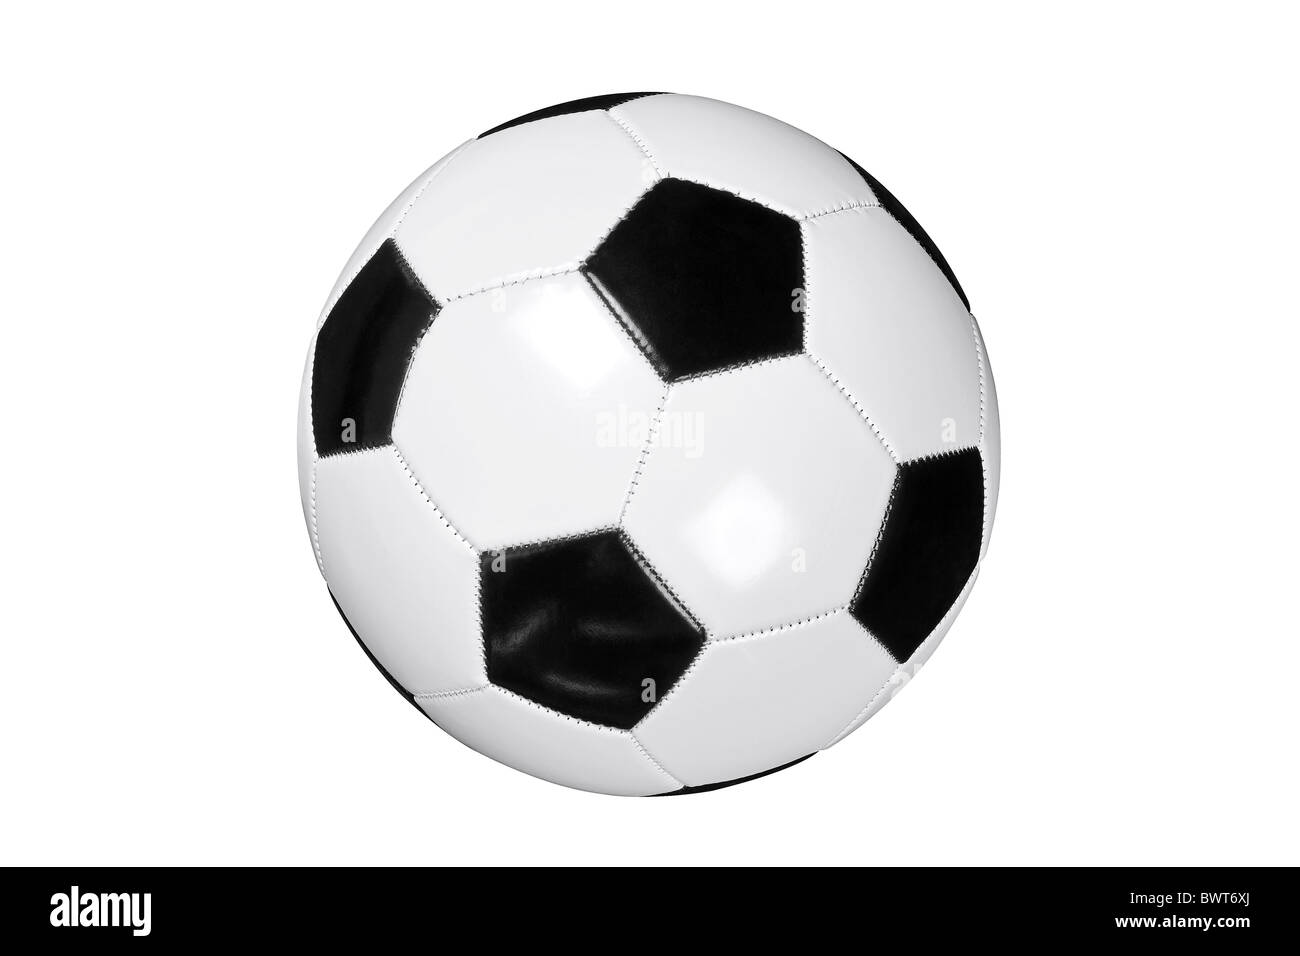 Photo of white and black leather football or soccer ball isolated on white background with clipping path done with pen tool. Stock Photo